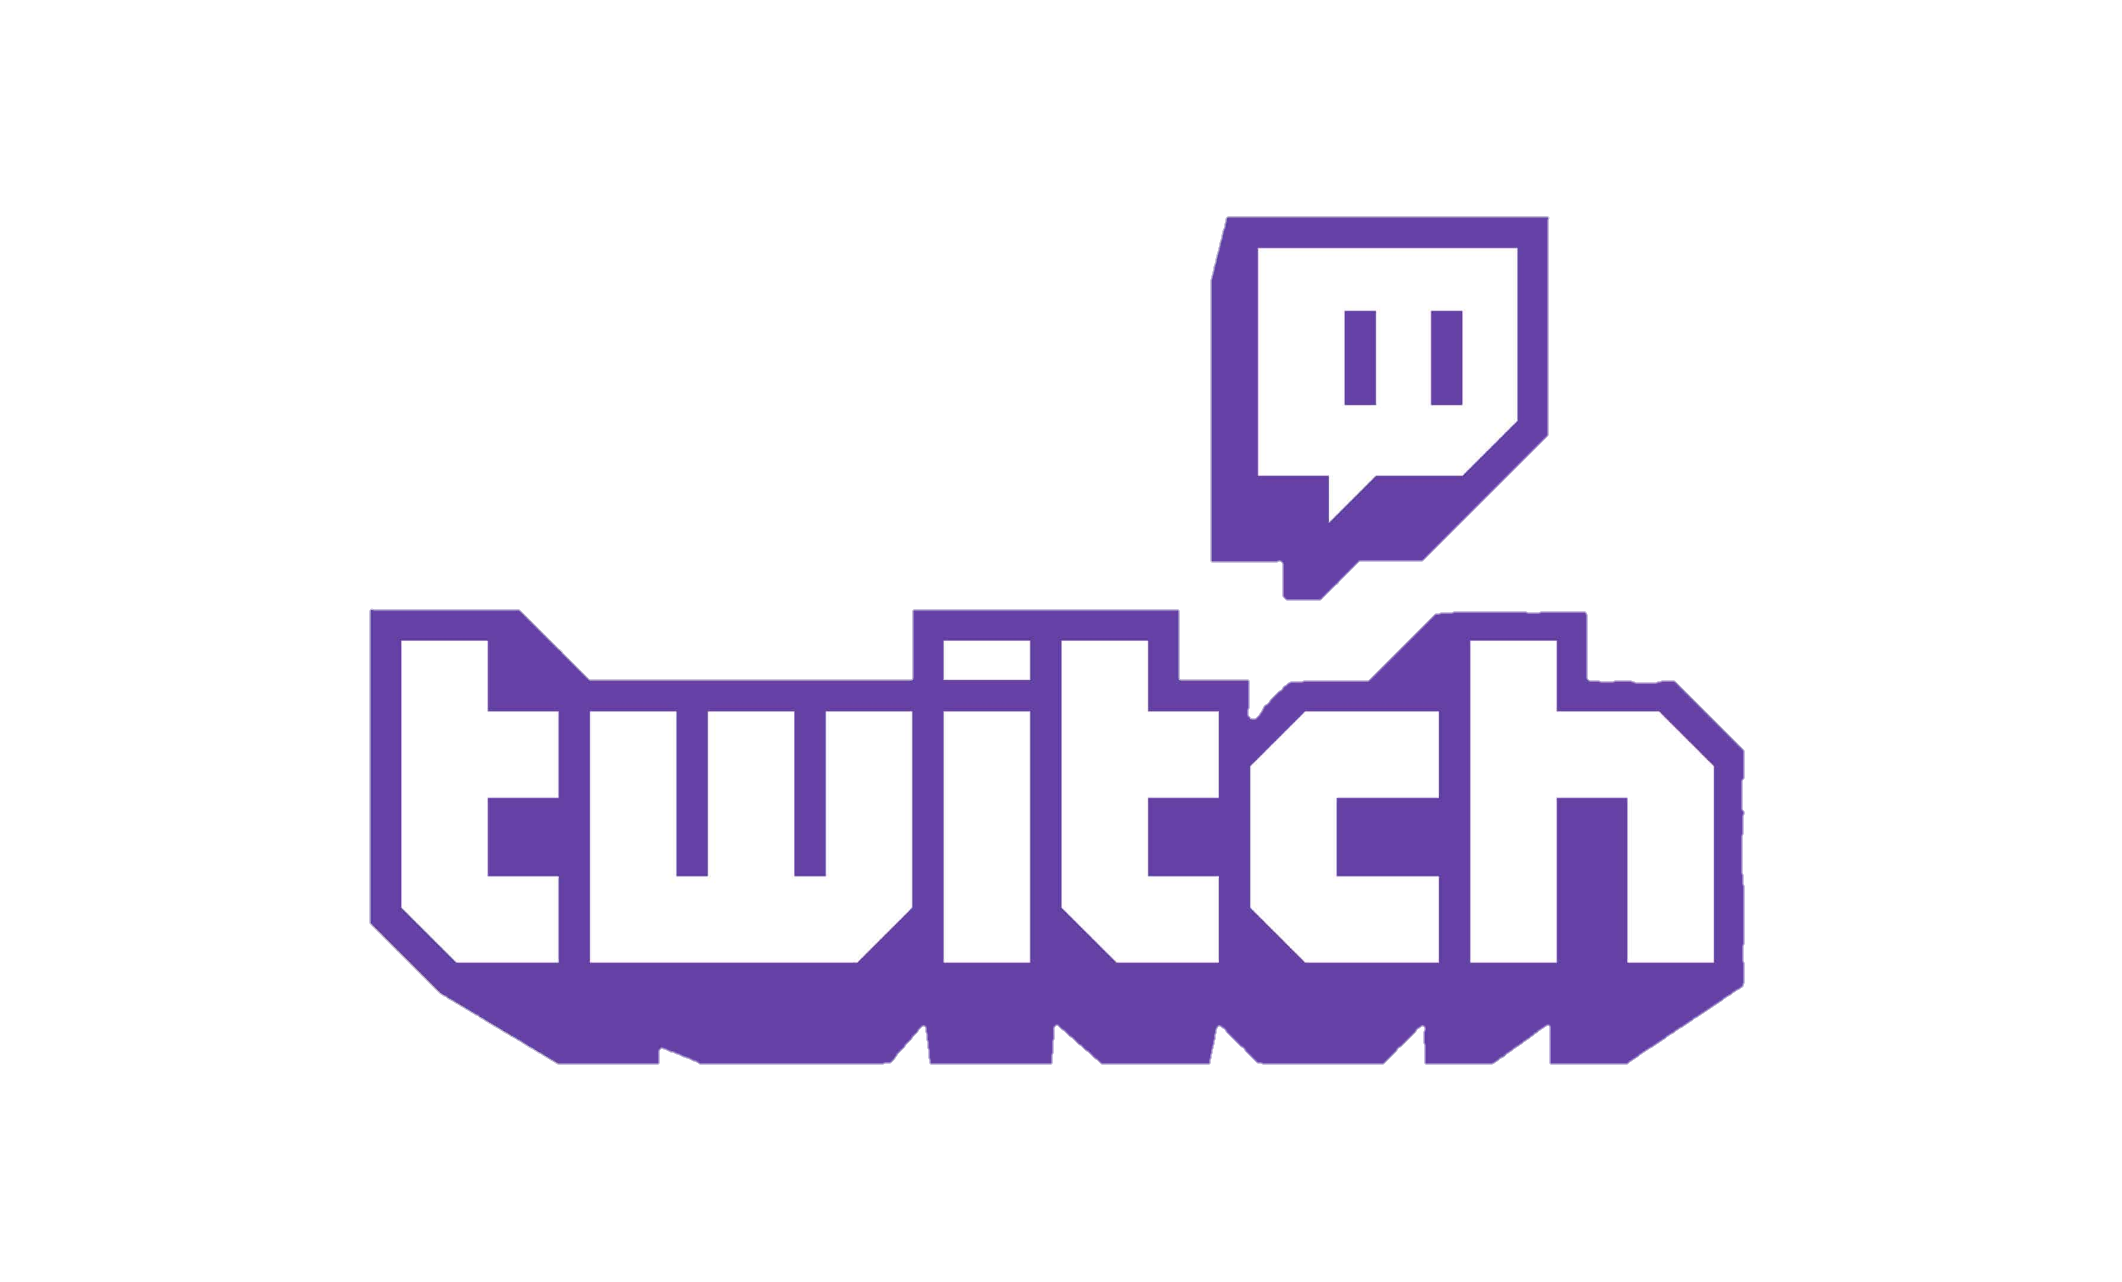 twitch-logo-png-from-pngfre-17